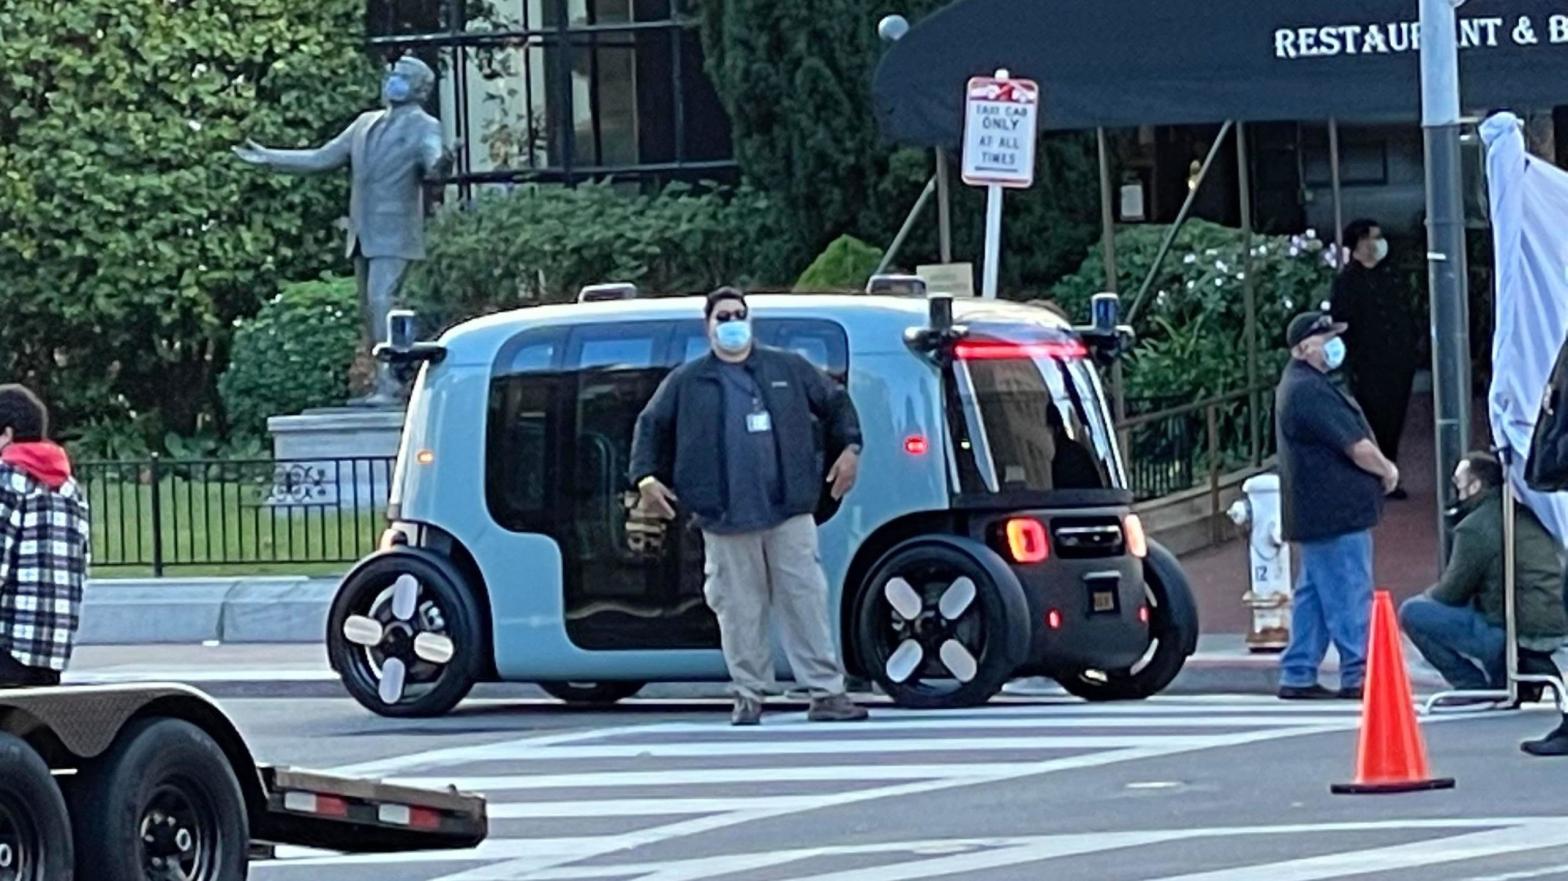 What appears to be a Zoox self-driving taxi on the streets of San Francisco this weekend. (Photo: Reddit user: Lakailb87, Other)